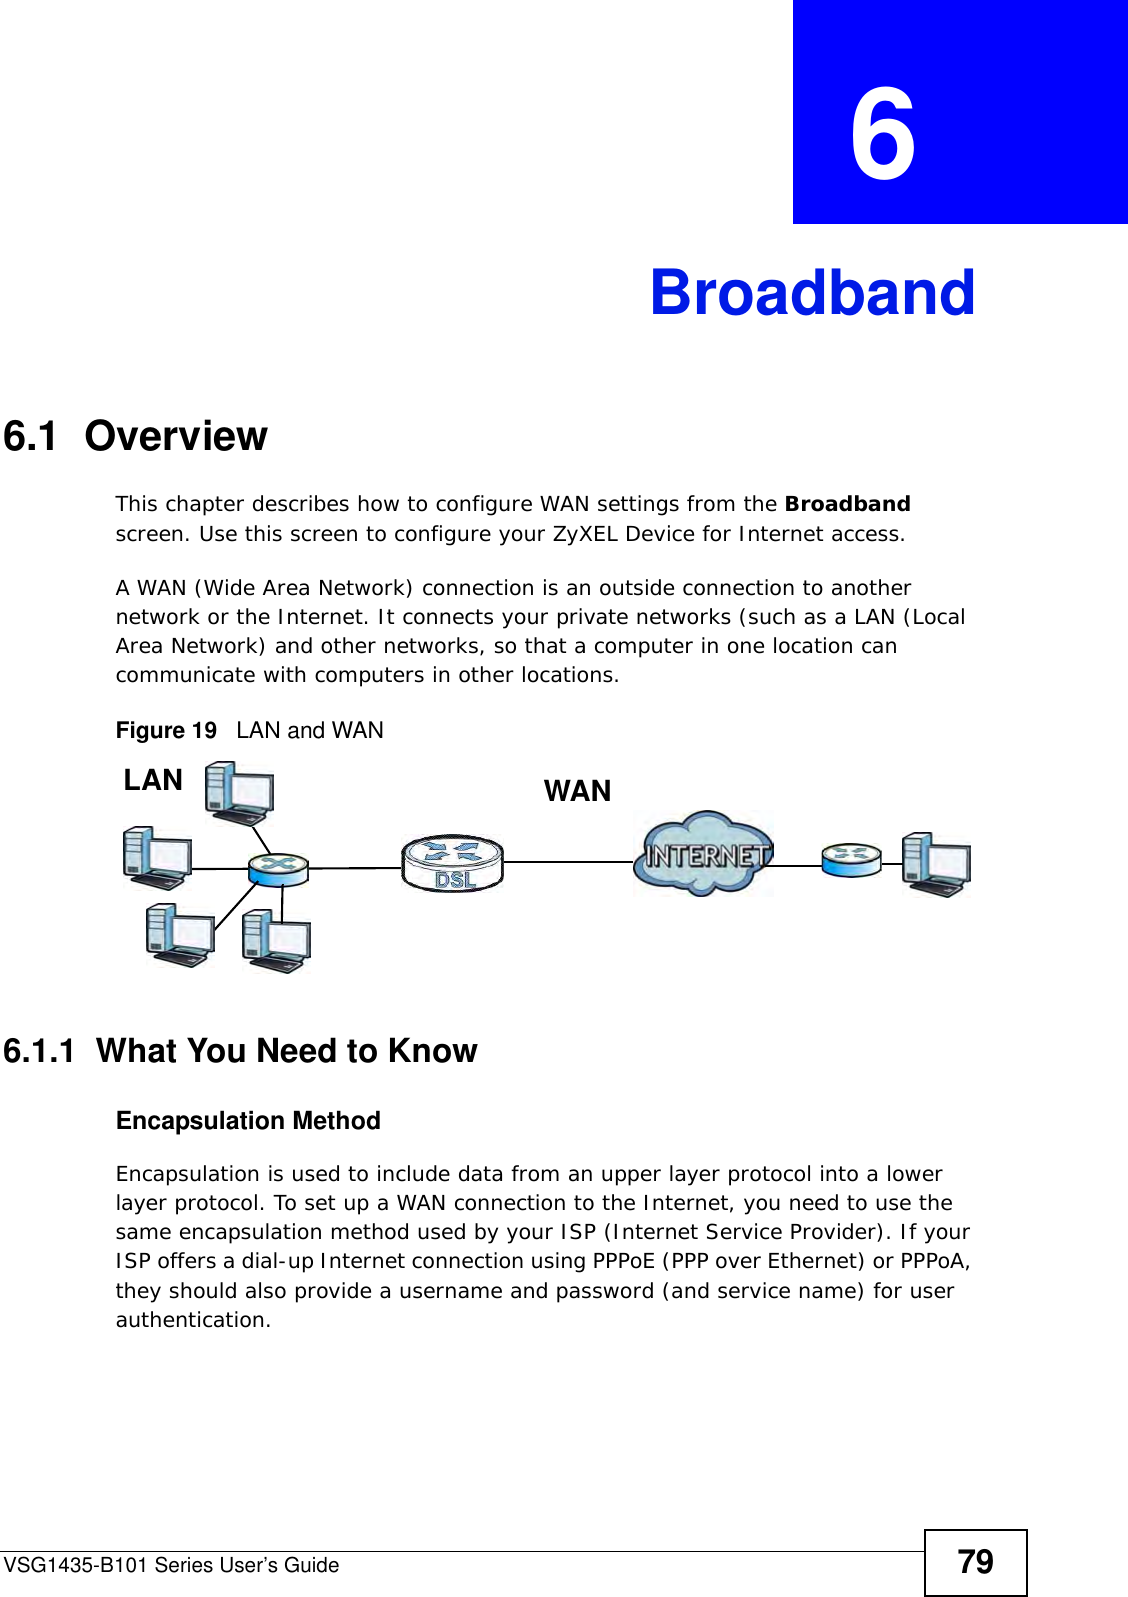 VSG1435-B101 Series User’s Guide 79CHAPTER  6 Broadband6.1  OverviewThis chapter describes how to configure WAN settings from the Broadband screen. Use this screen to configure your ZyXEL Device for Internet access.A WAN (Wide Area Network) connection is an outside connection to another network or the Internet. It connects your private networks (such as a LAN (Local Area Network) and other networks, so that a computer in one location can communicate with computers in other locations.Figure 19   LAN and WAN6.1.1  What You Need to KnowEncapsulation MethodEncapsulation is used to include data from an upper layer protocol into a lower layer protocol. To set up a WAN connection to the Internet, you need to use the same encapsulation method used by your ISP (Internet Service Provider). If your ISP offers a dial-up Internet connection using PPPoE (PPP over Ethernet) or PPPoA, they should also provide a username and password (and service name) for user authentication.WANLAN